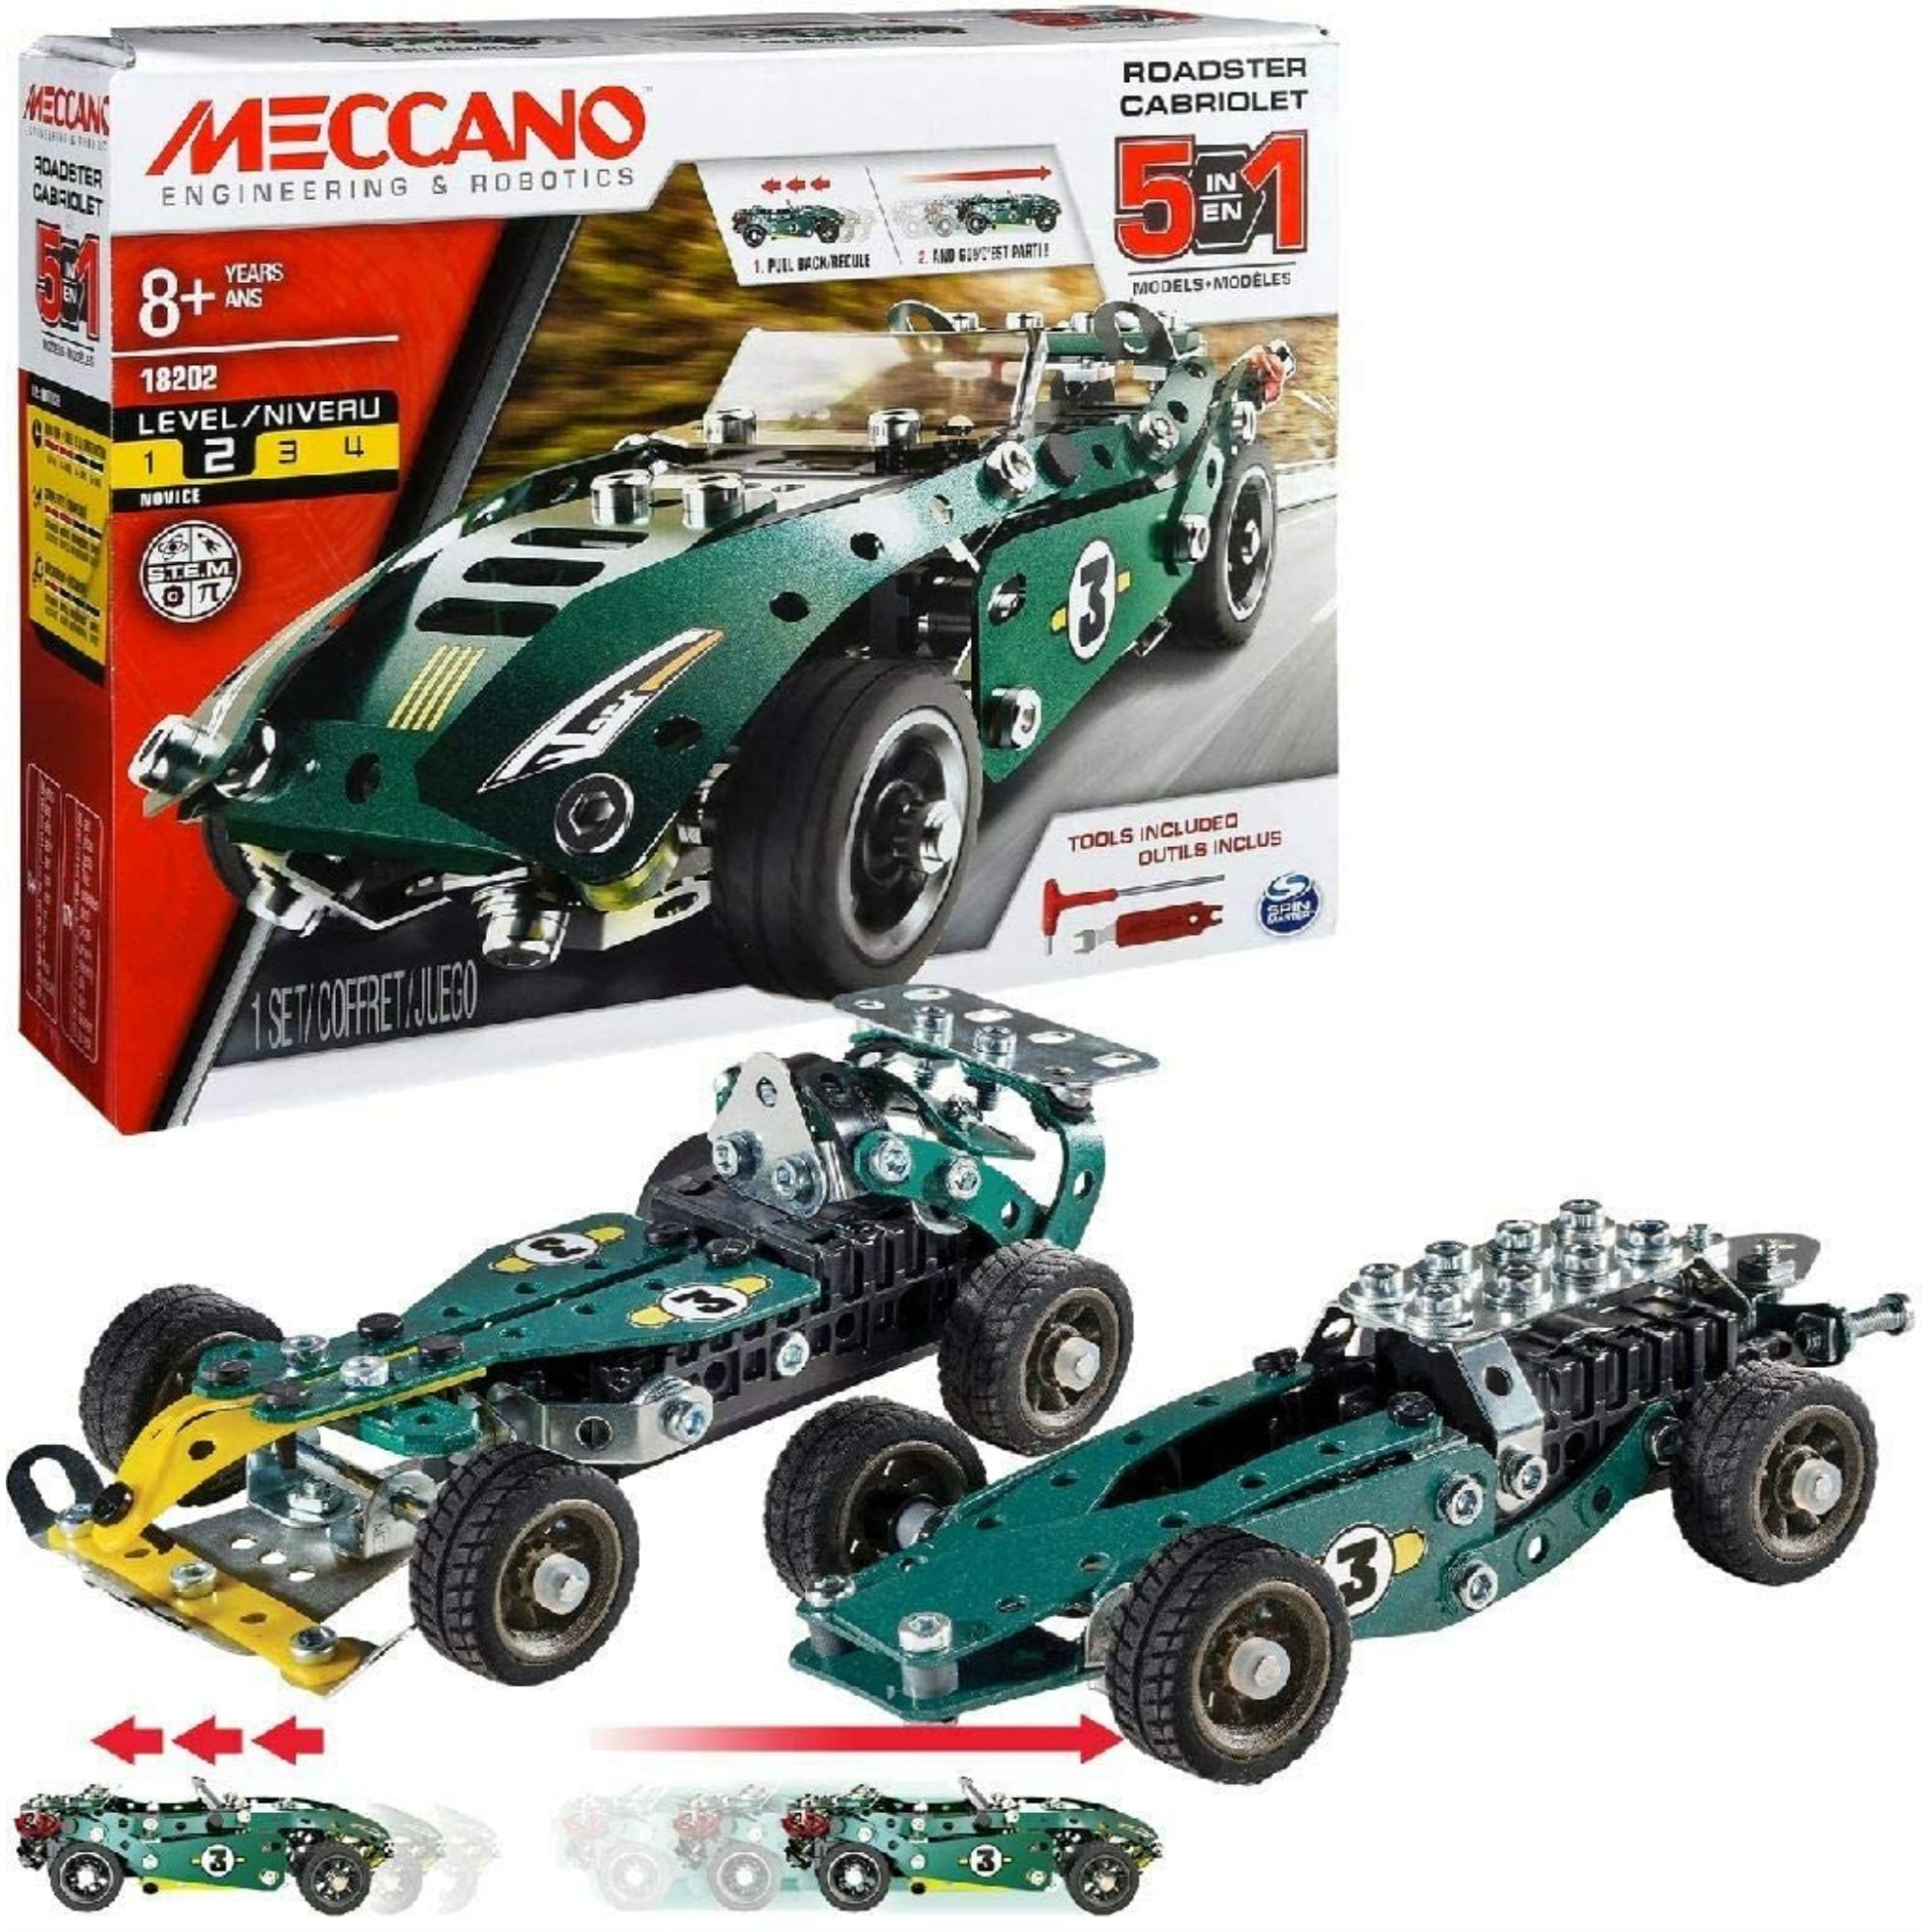 Meccano 5-in-1 Model Set Roadster Cabriolet with Pull Back Motor Age 8+ 